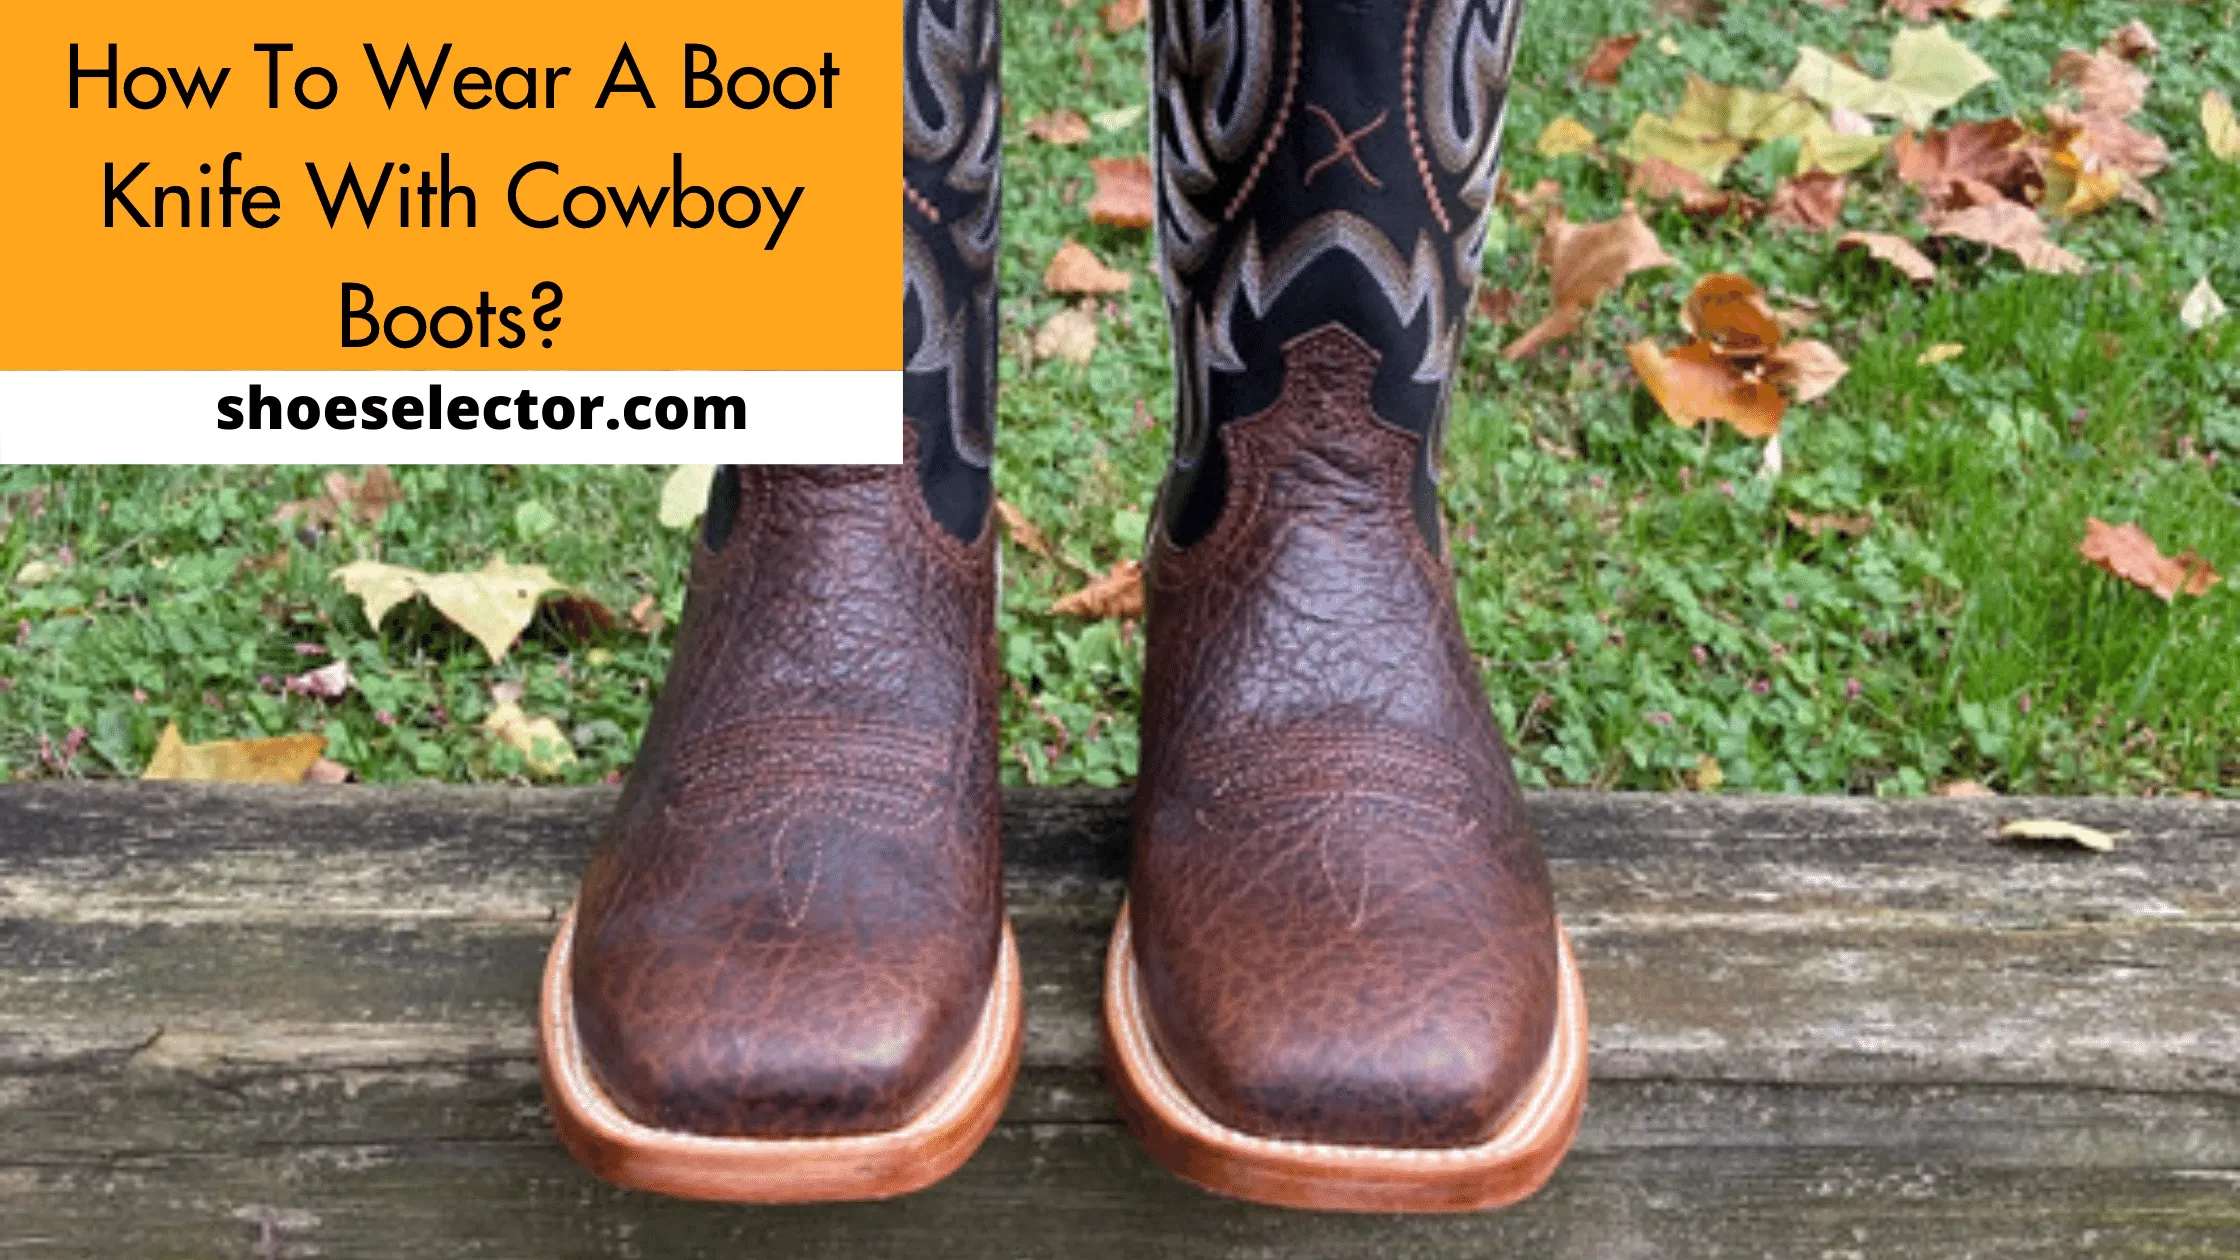 How To Wear A Boot Knife With Cowboy Boots? - Pro Tips